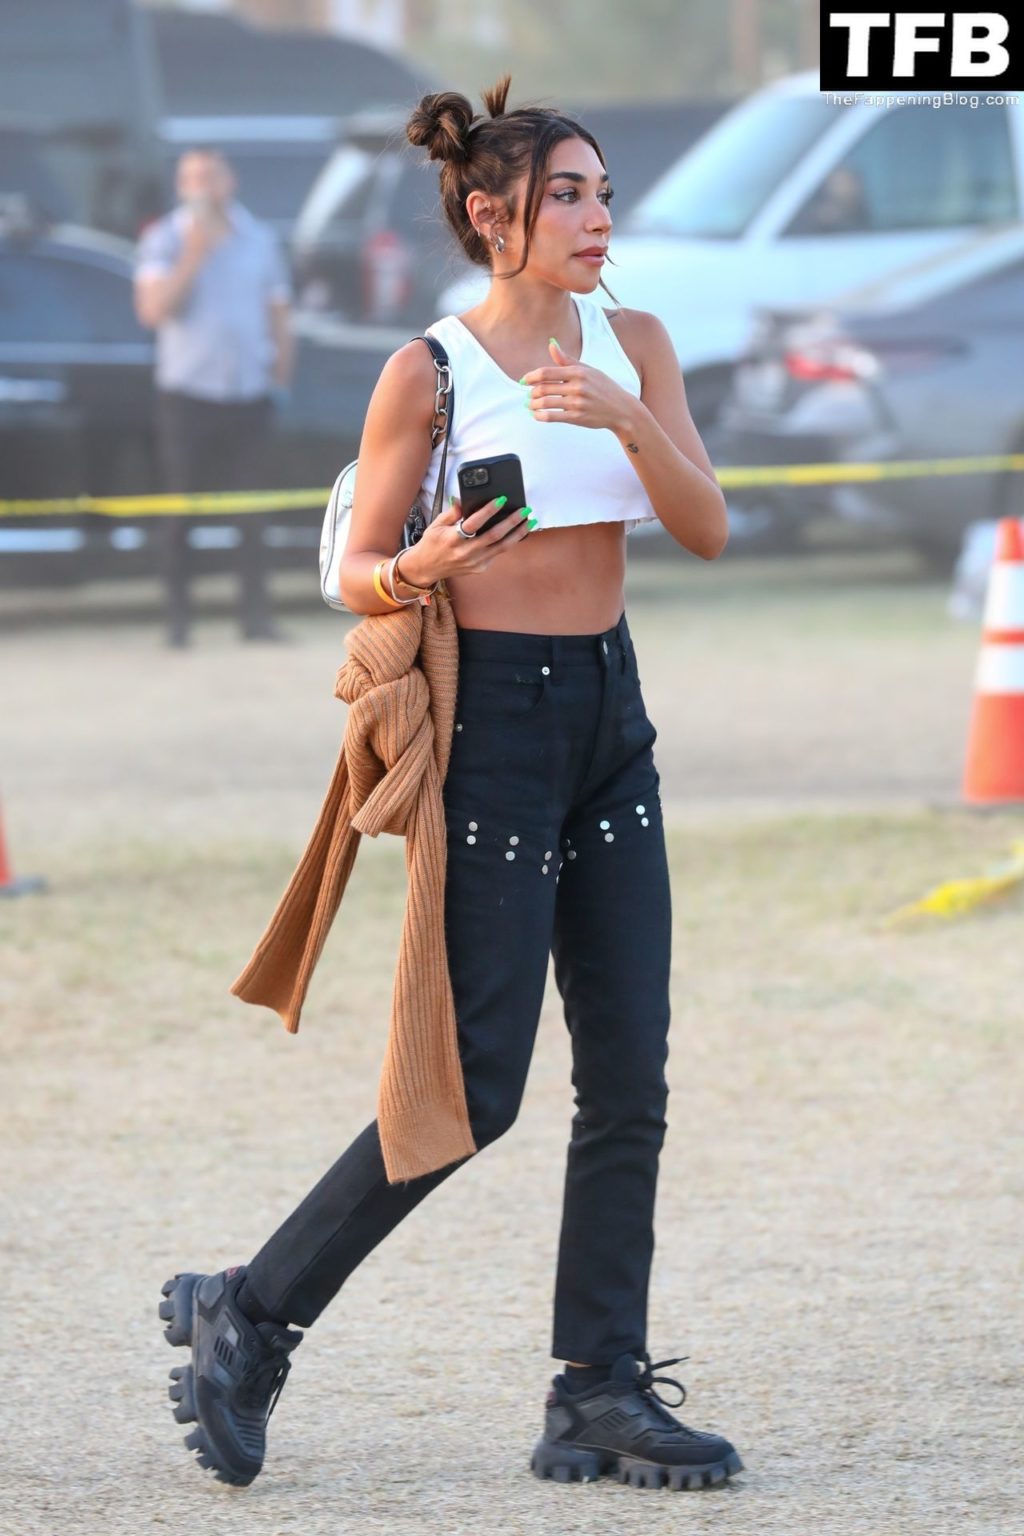 Chantel Jeffries Sexy The Fappening Blog 1 5 1024x1536 - Chantel Jeffries Shows Off Her Pokies & Sexy Waist While Hanging Out at Weekend 2 Day 3 of Coachella (10 Photos)